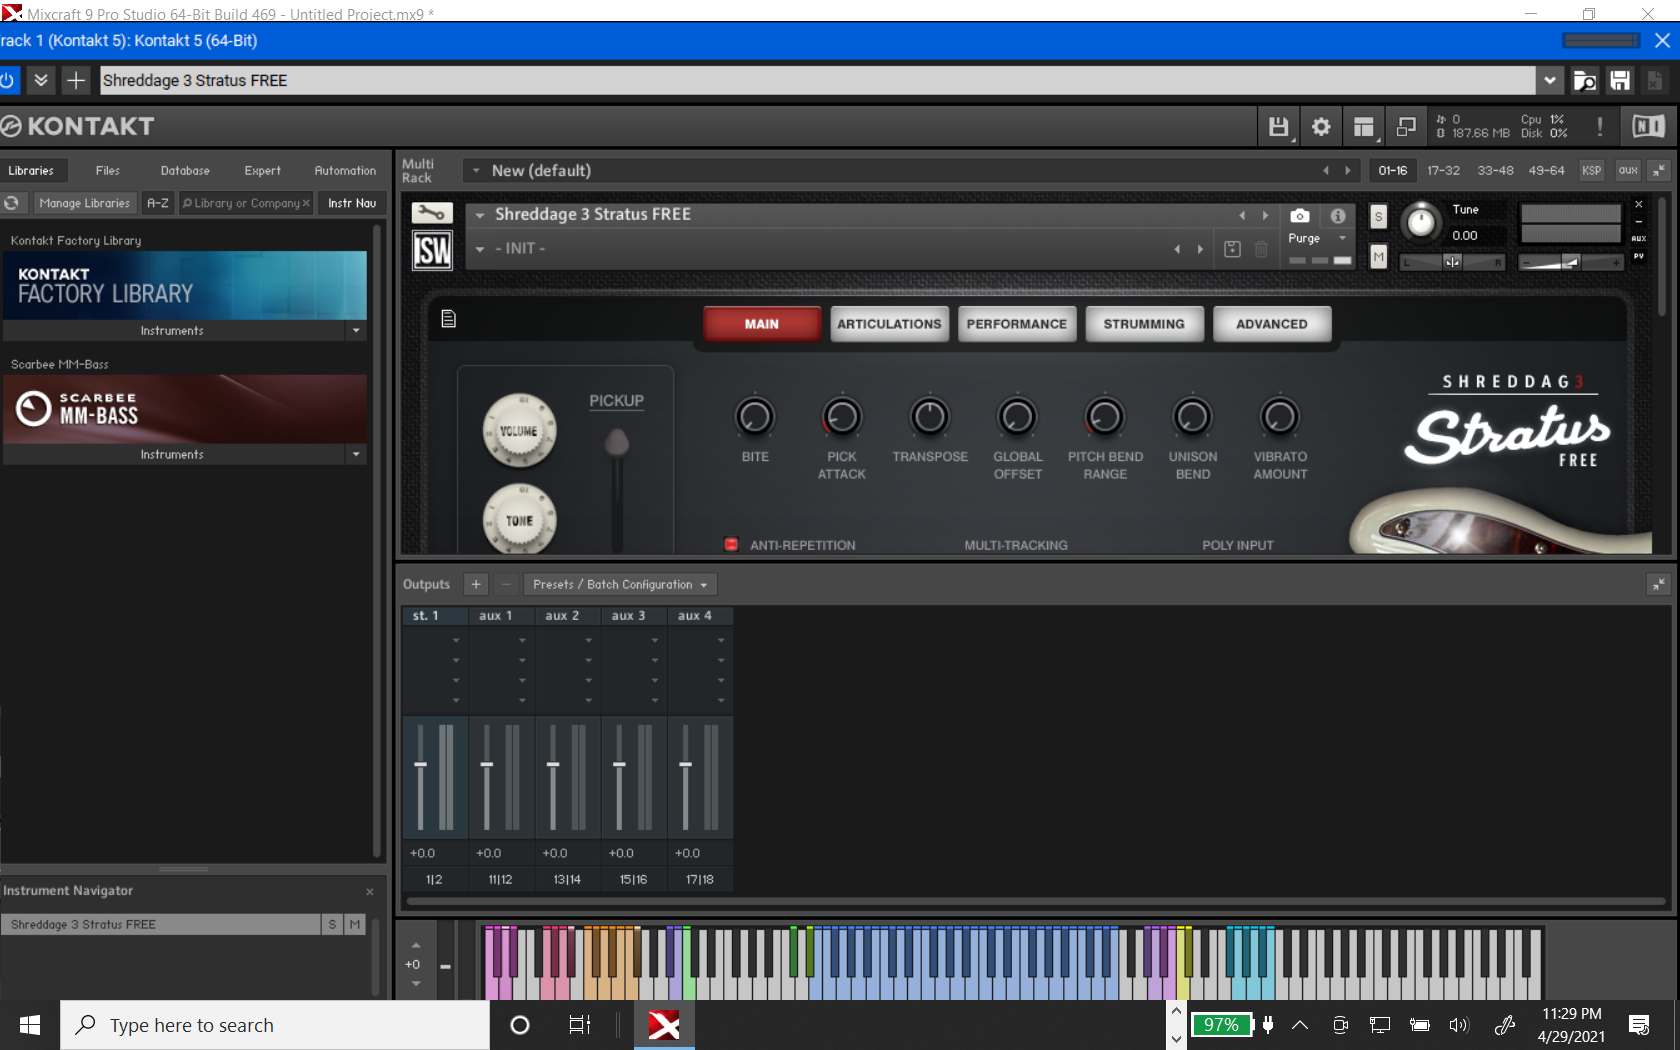 This is what Kontakt looks like with the output panel open.